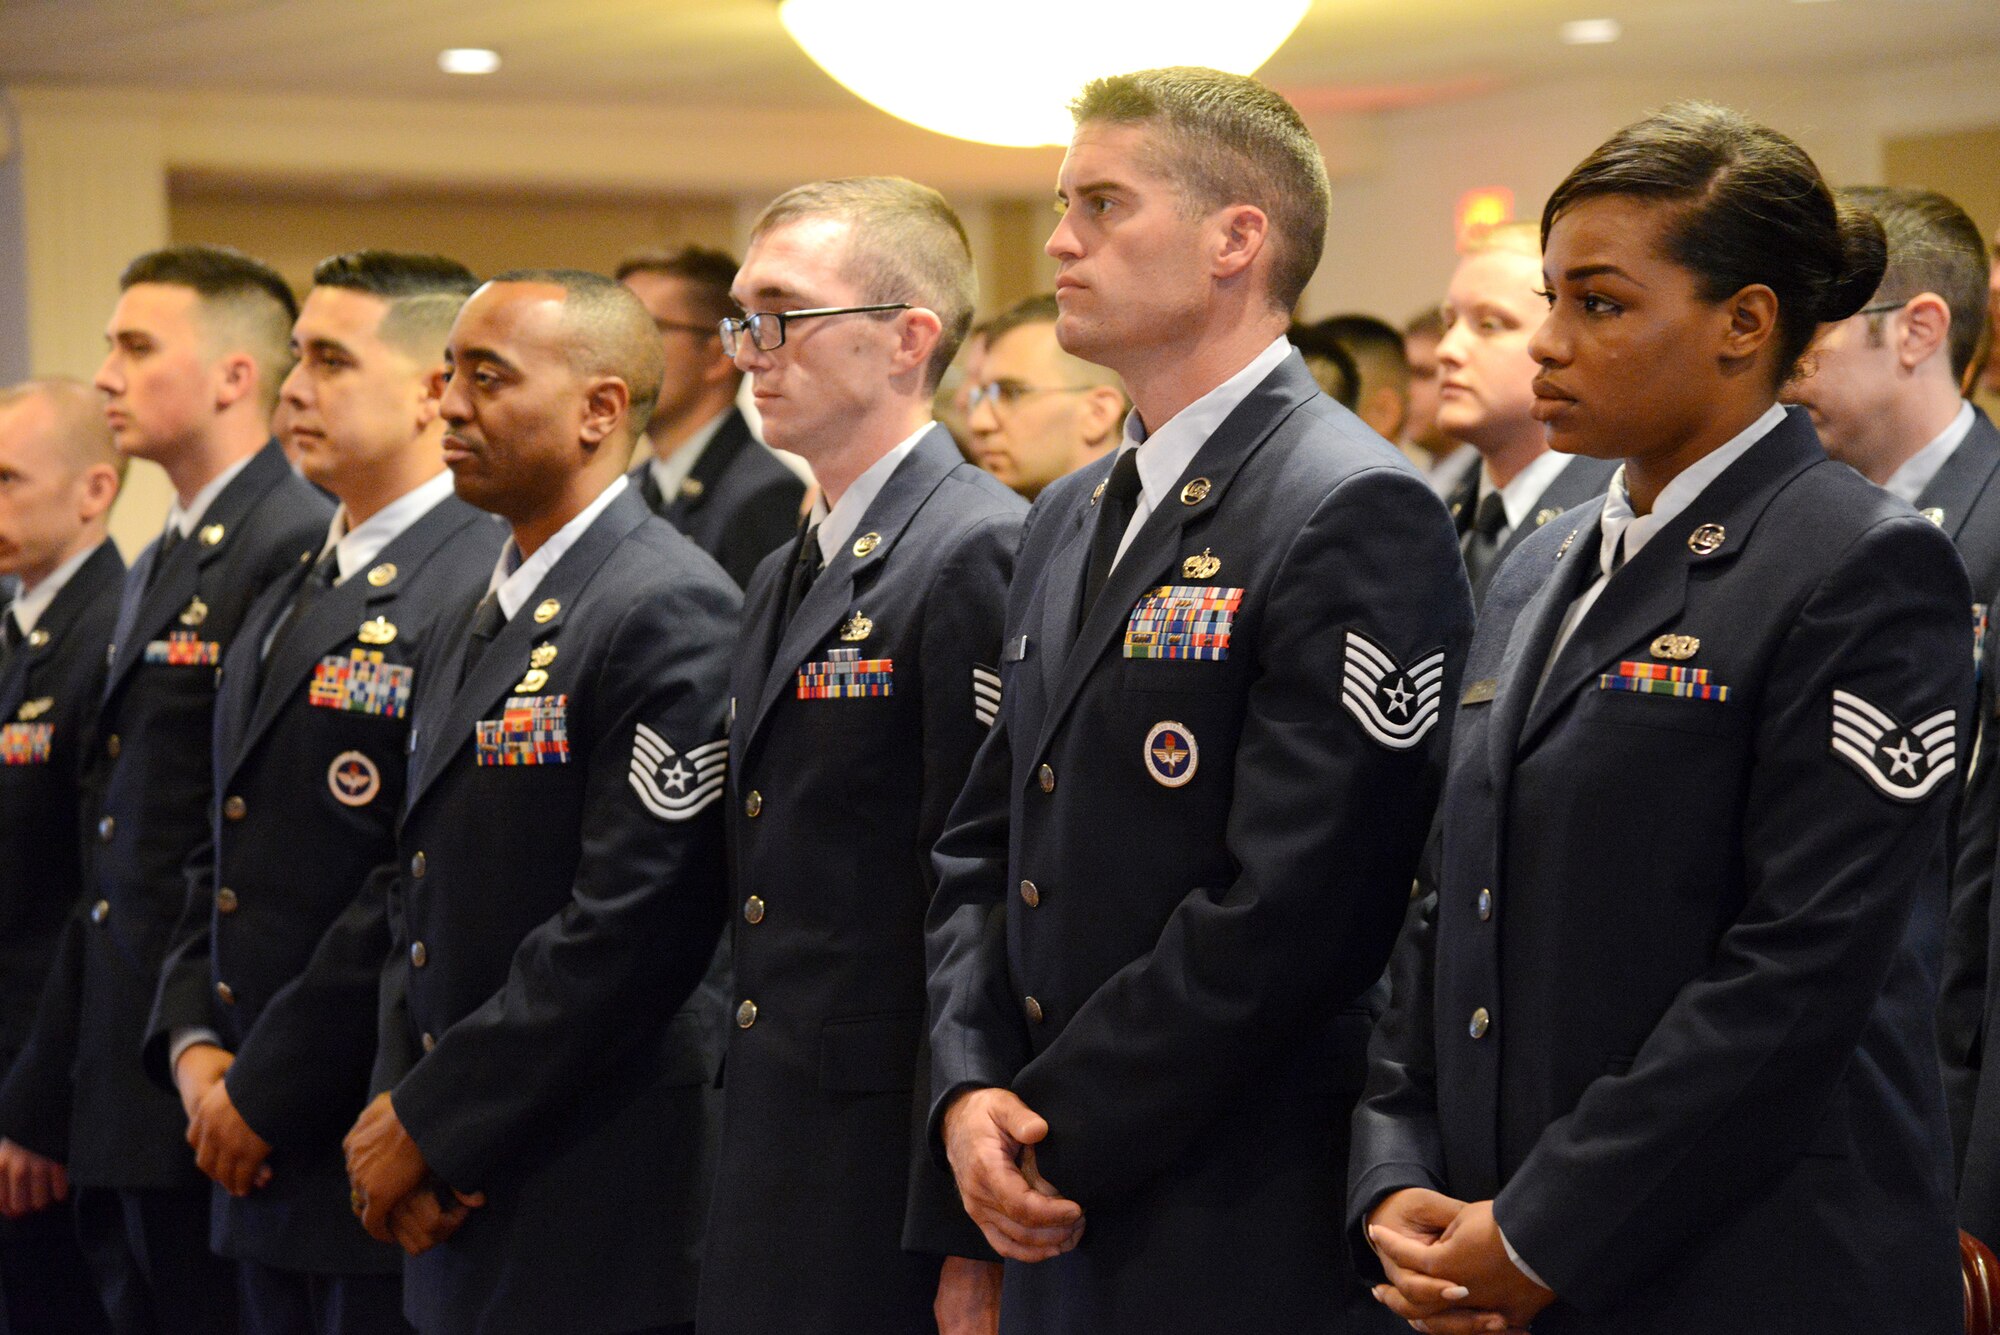 Tinker's Community College of the Air Force Graduation ceremony recognized 126 graduates receiving 130 diplomas, with four Airmen earning more than one degree.